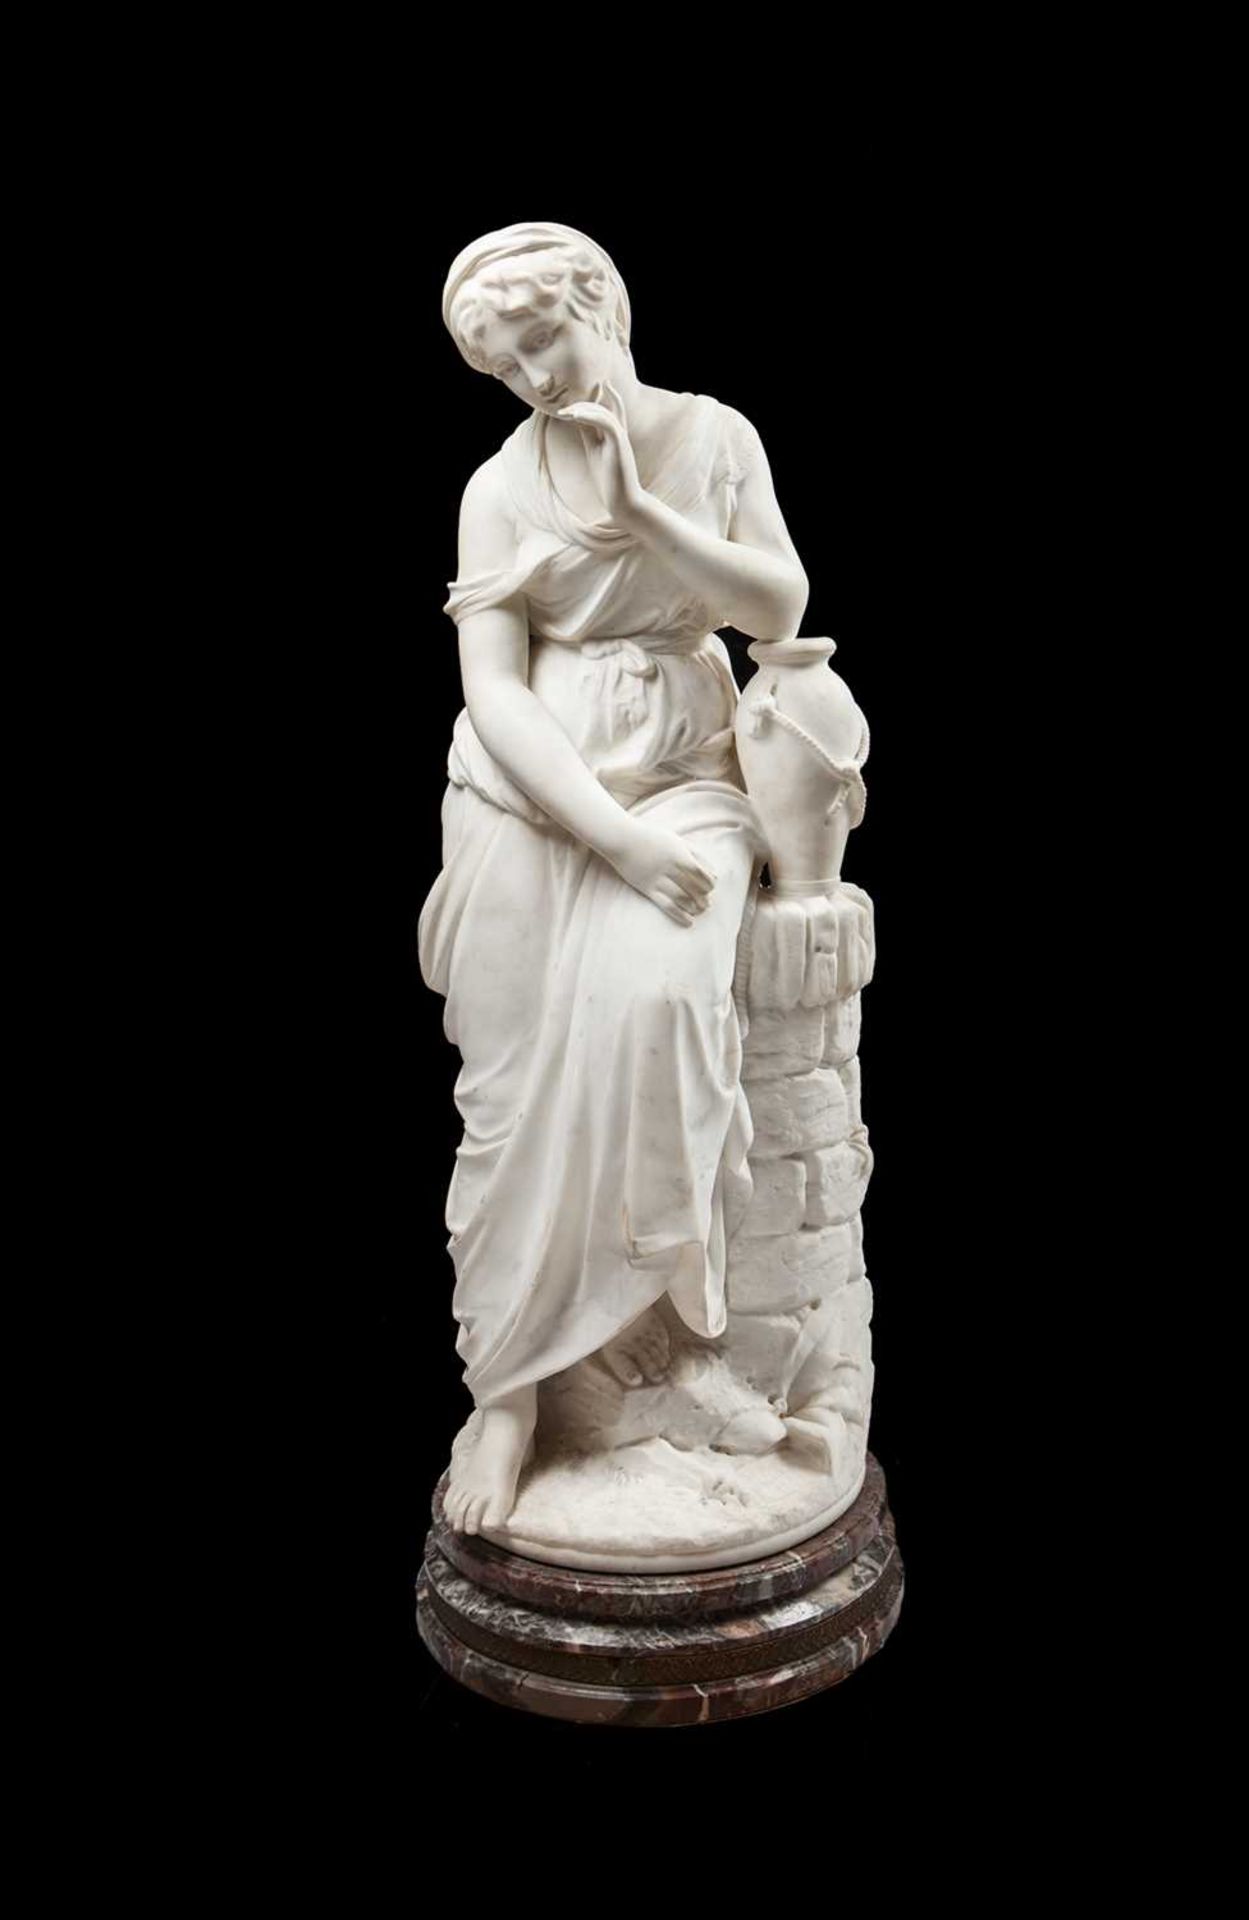 A LARGE LATE 19TH CENTURY ITALIAN MARBLE FIGURE OF RUTH AT THE WELL